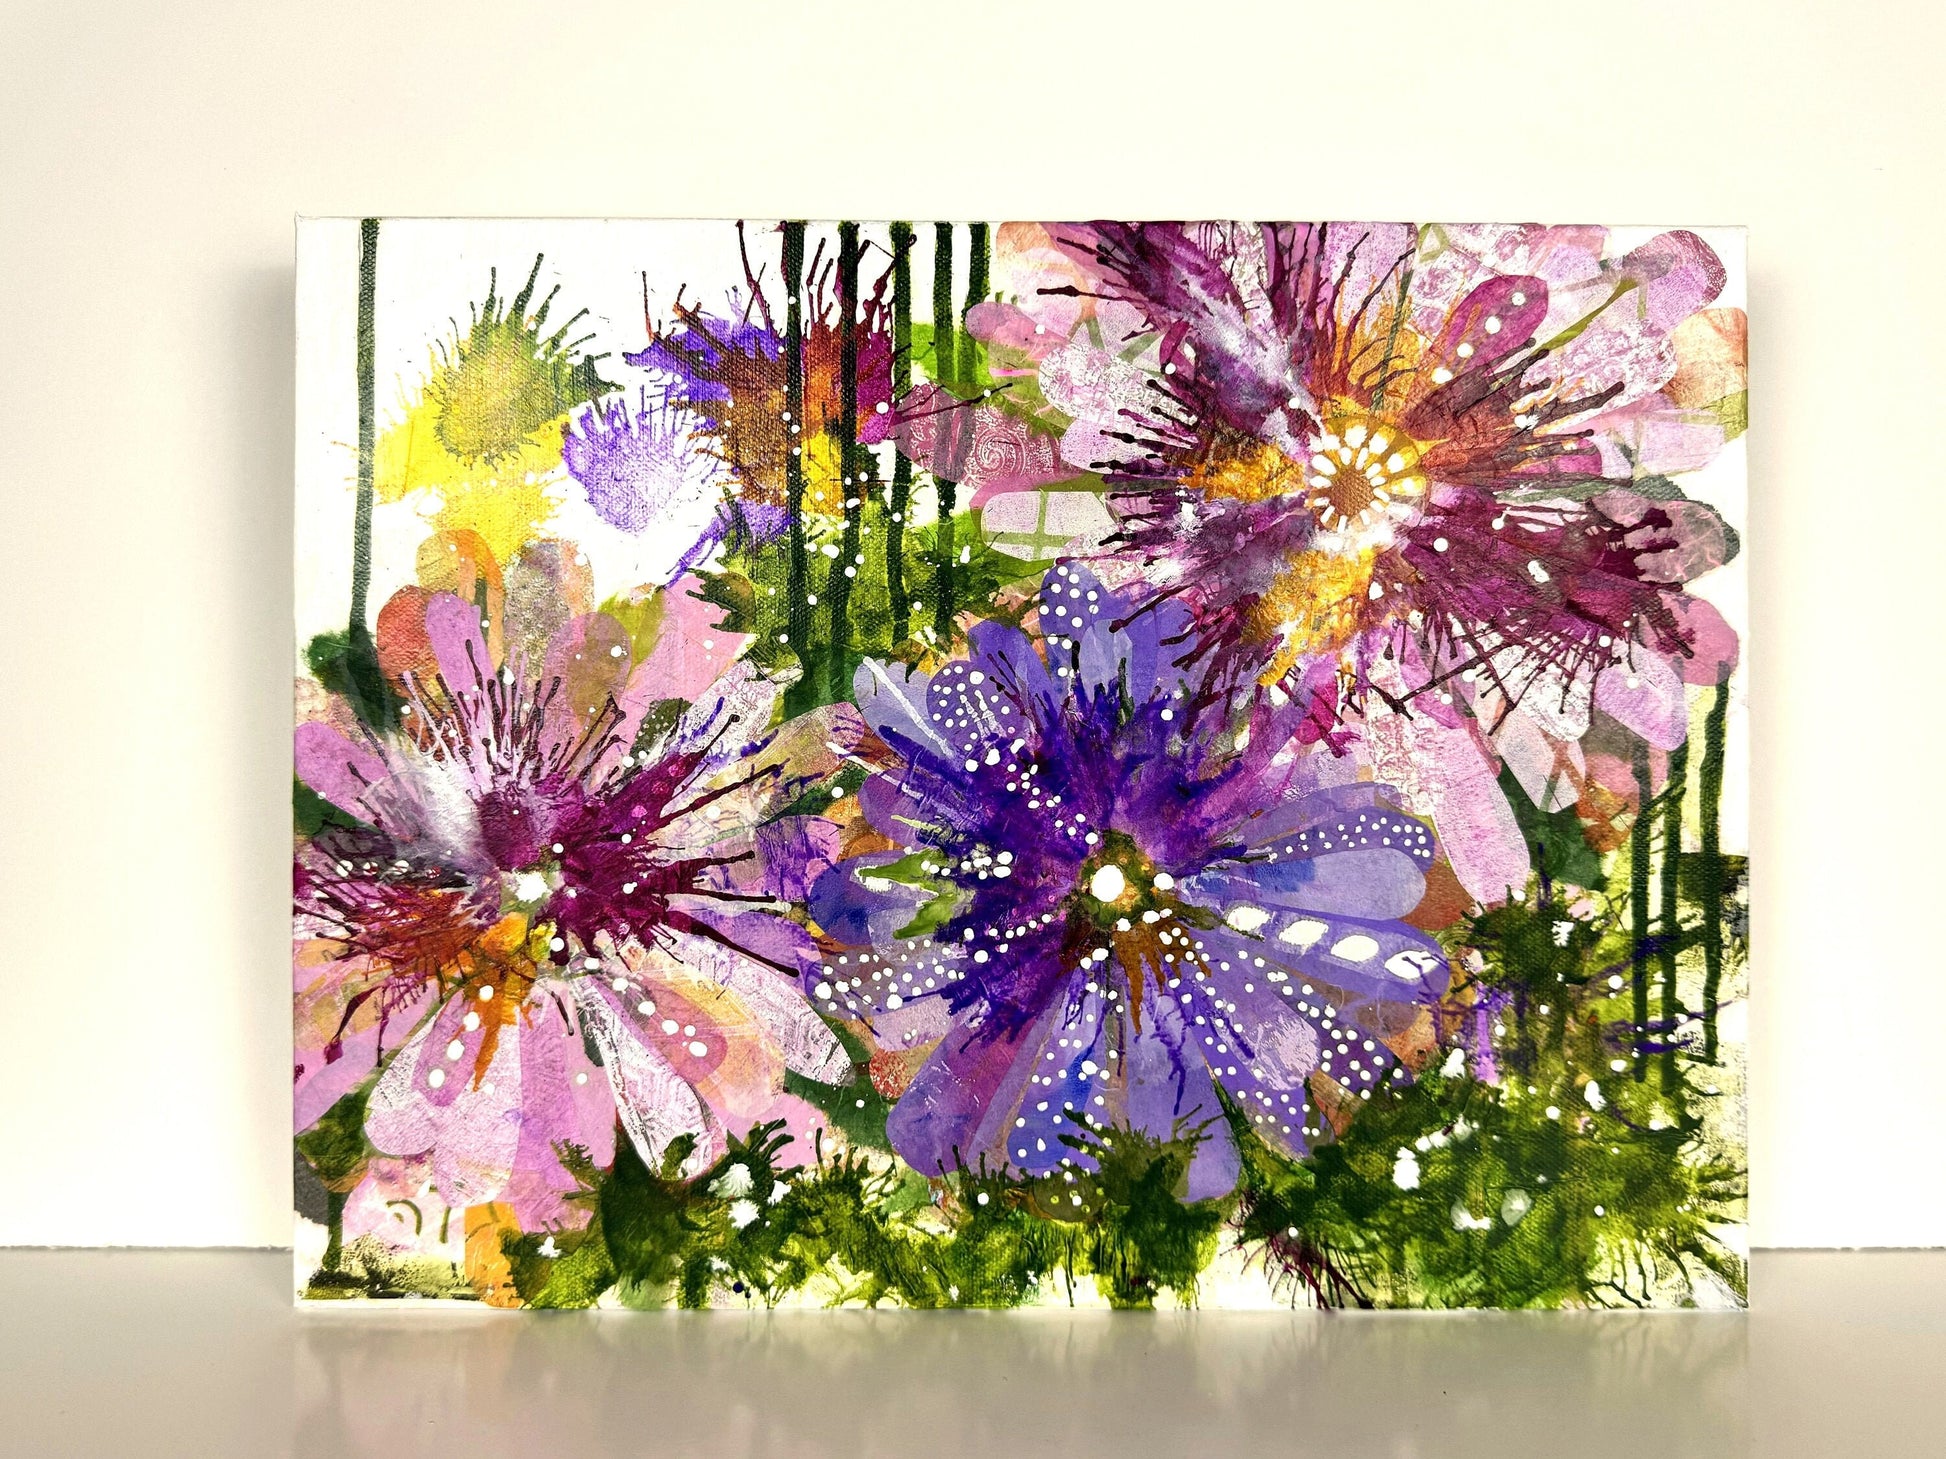 Flora Bella Floral Collage Painting Art on Canvas Eye catching feminine accent Botanical design Nature home accent Garden decor Colorful